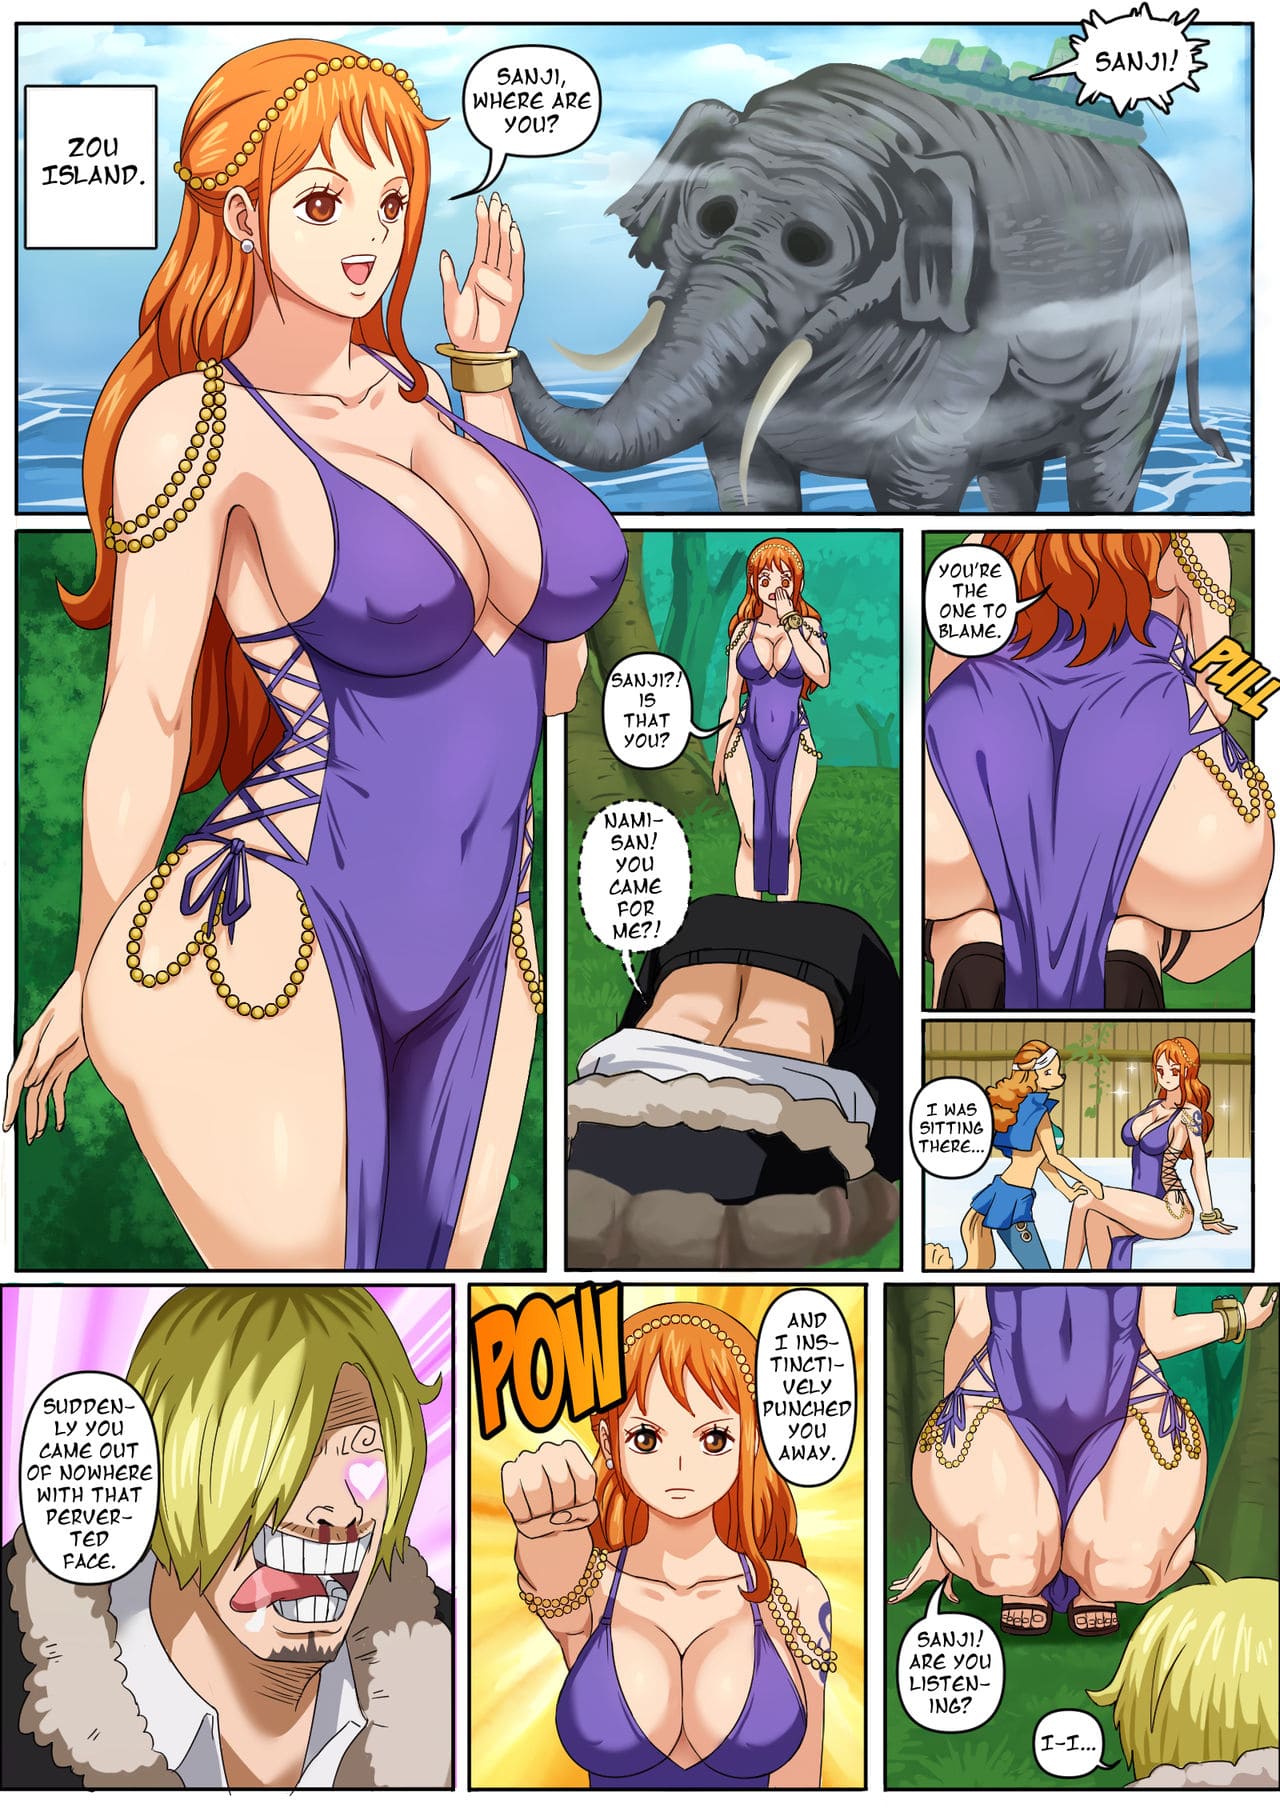 Read A Chance With Nami By Pink Pawg | One Piece R18 Doujin